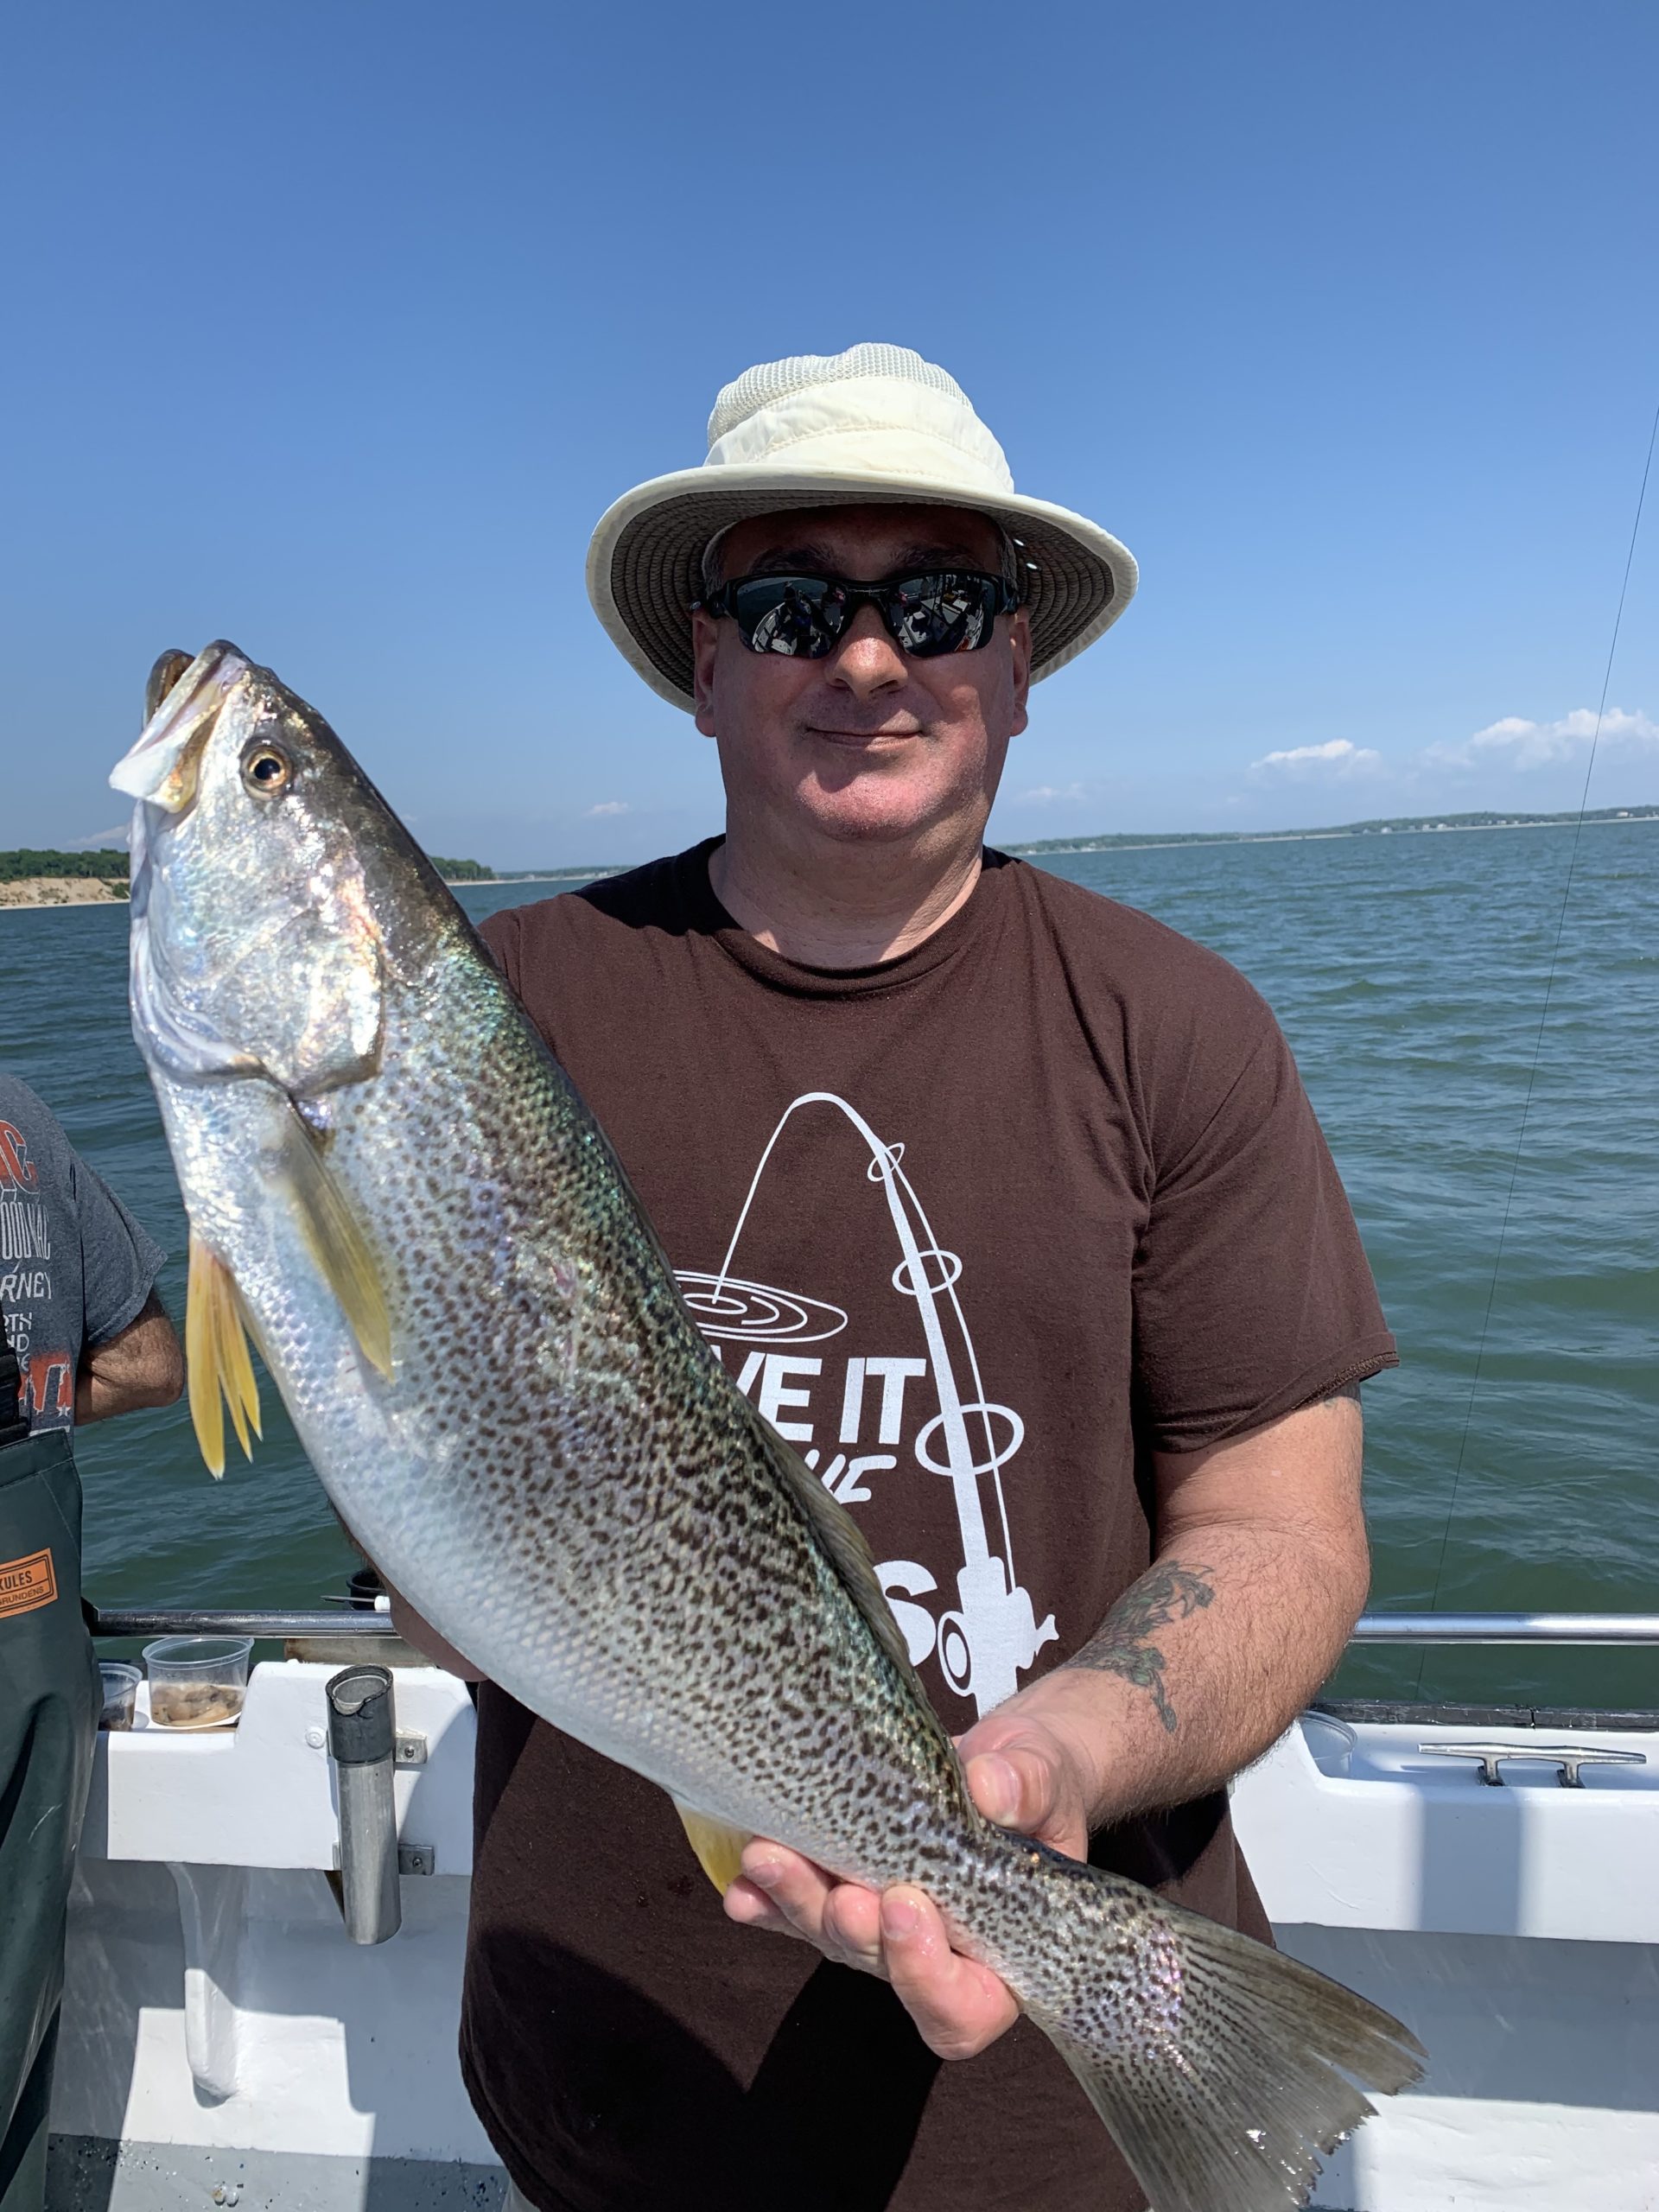 James Hall with a nice Peconic Bay weakfish caught aboard the Shinnecock Star.